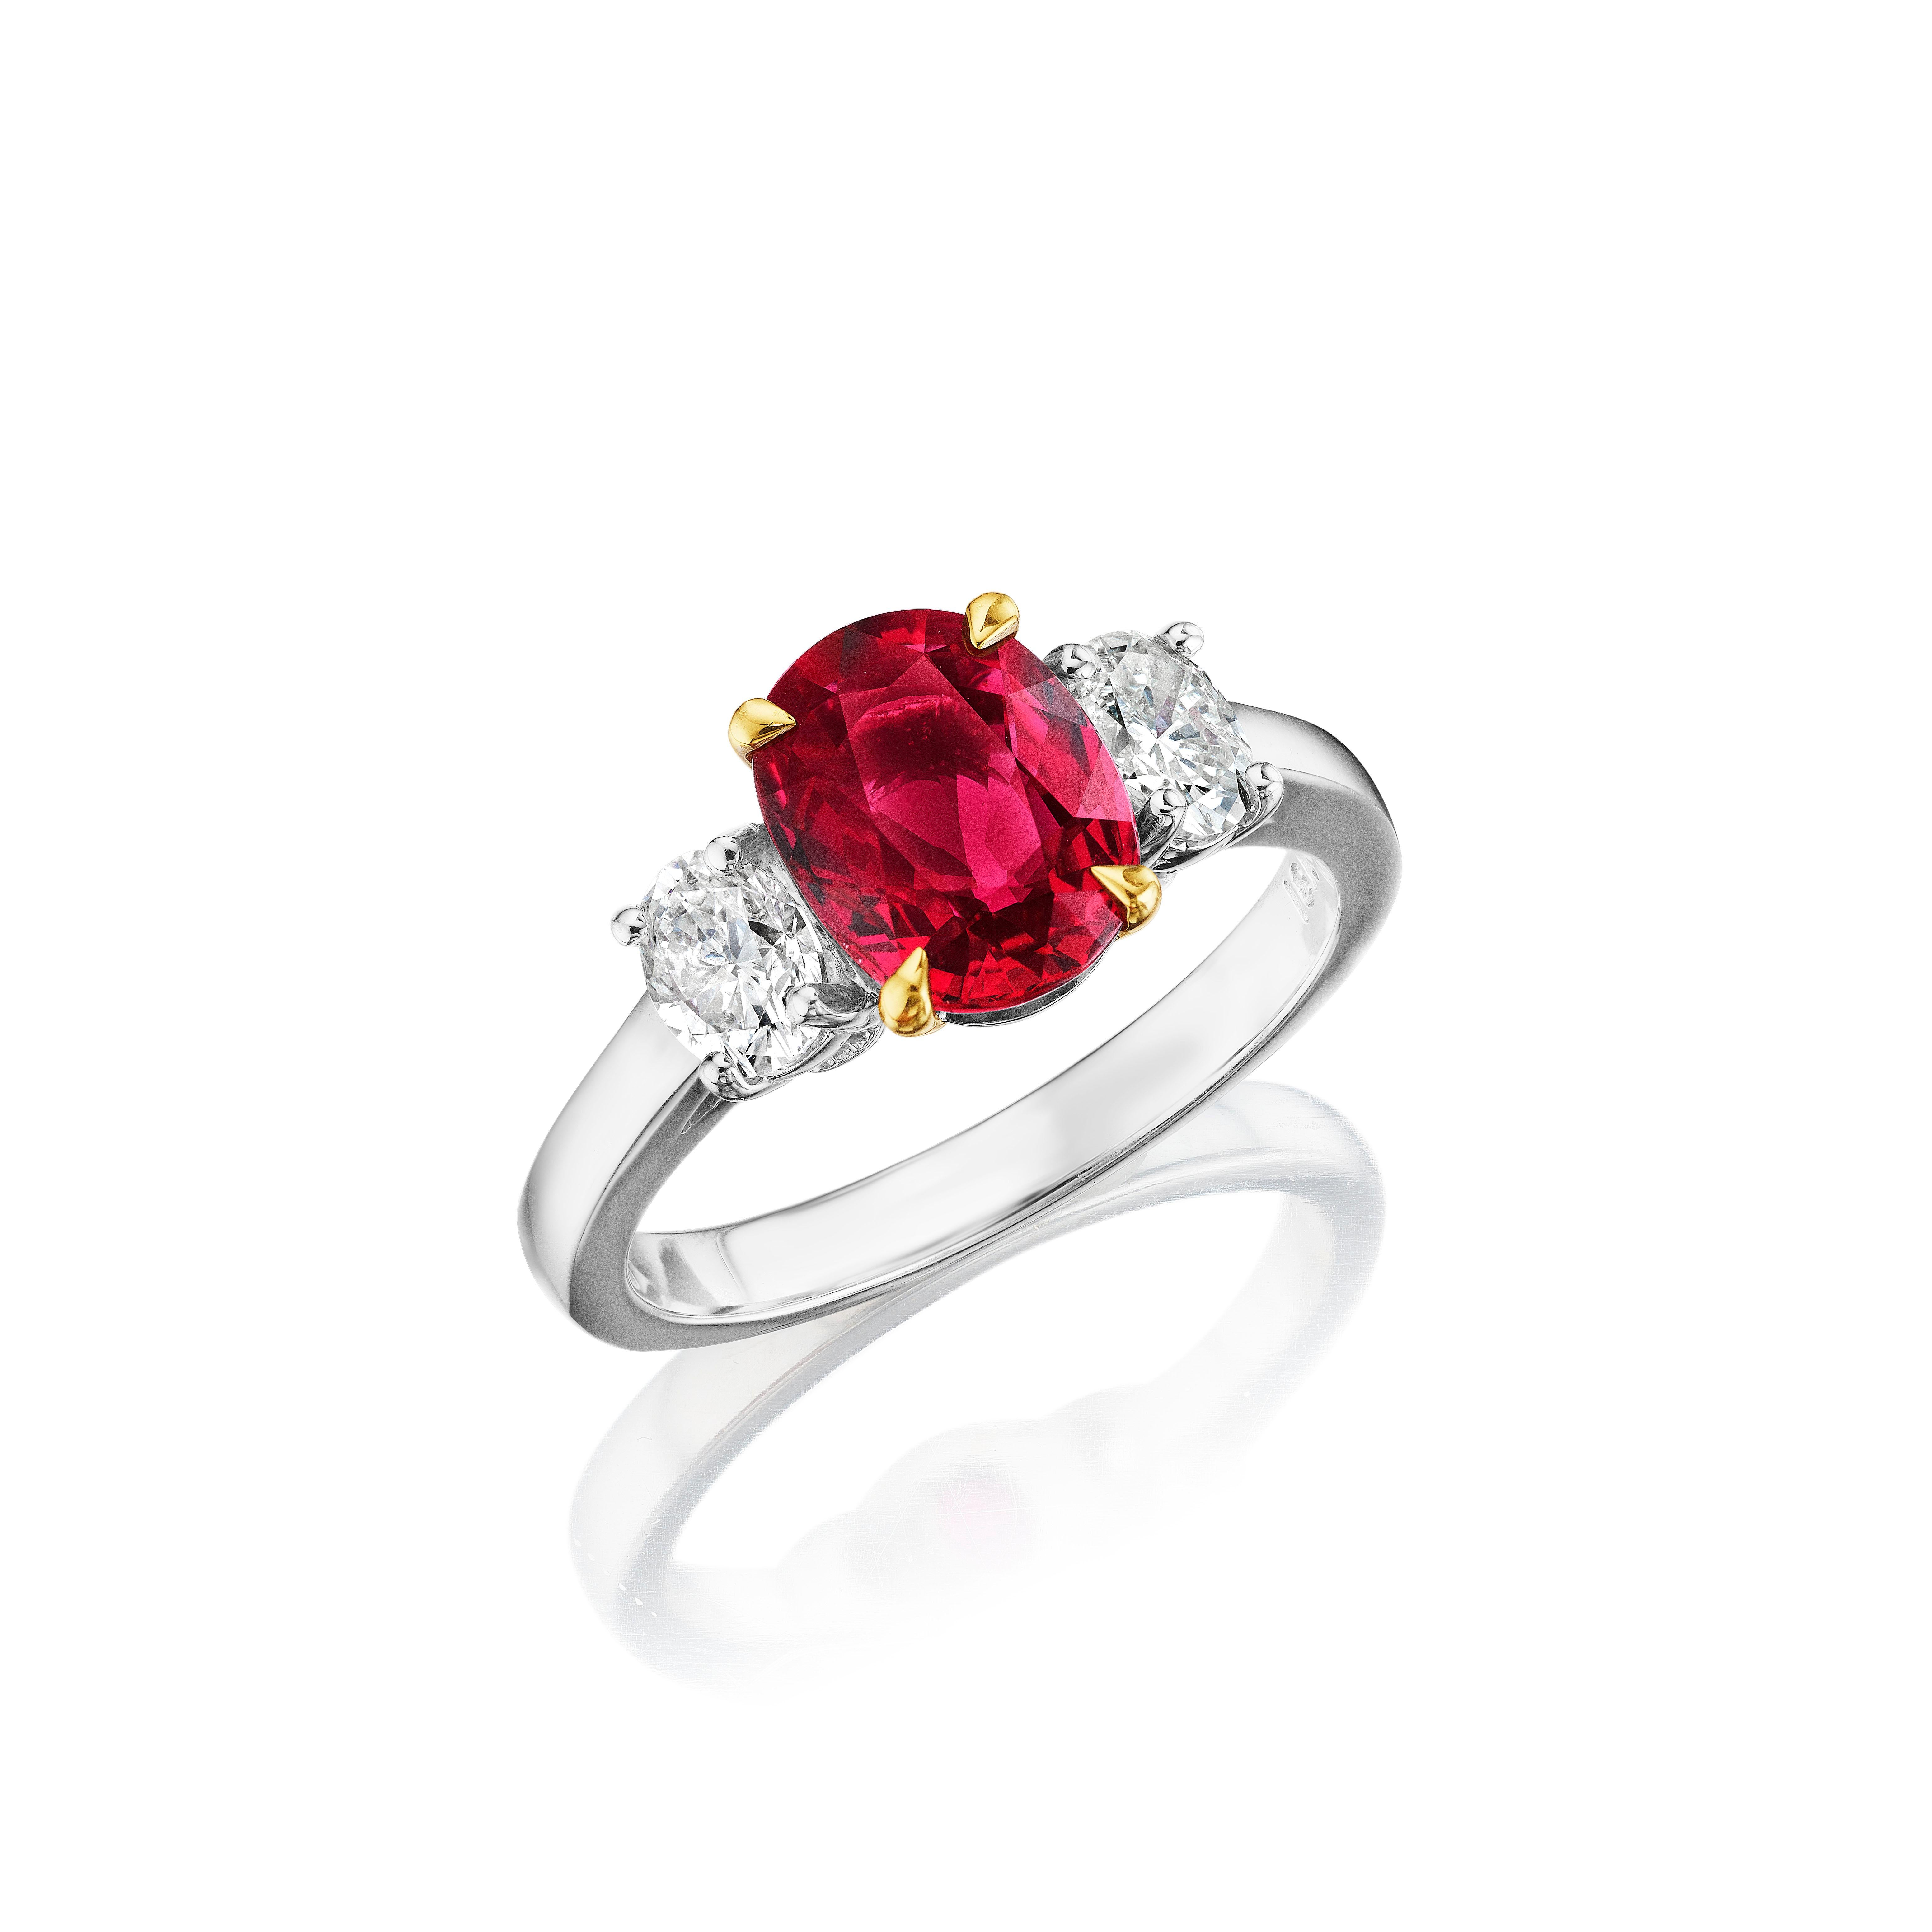 •	18KT Two Tone
•	Size 6.5
•	2.96 Carats

•	Number of Oval Rubies: 1
•	Carat Weight: 2.32ctw

•	Number of Oval Diamonds: 2
•	Carat Weight: 0.64ctw

•	This one of a kind ring holds a beautiful 2.32 carat oval cut red ruby in the center, set between 2